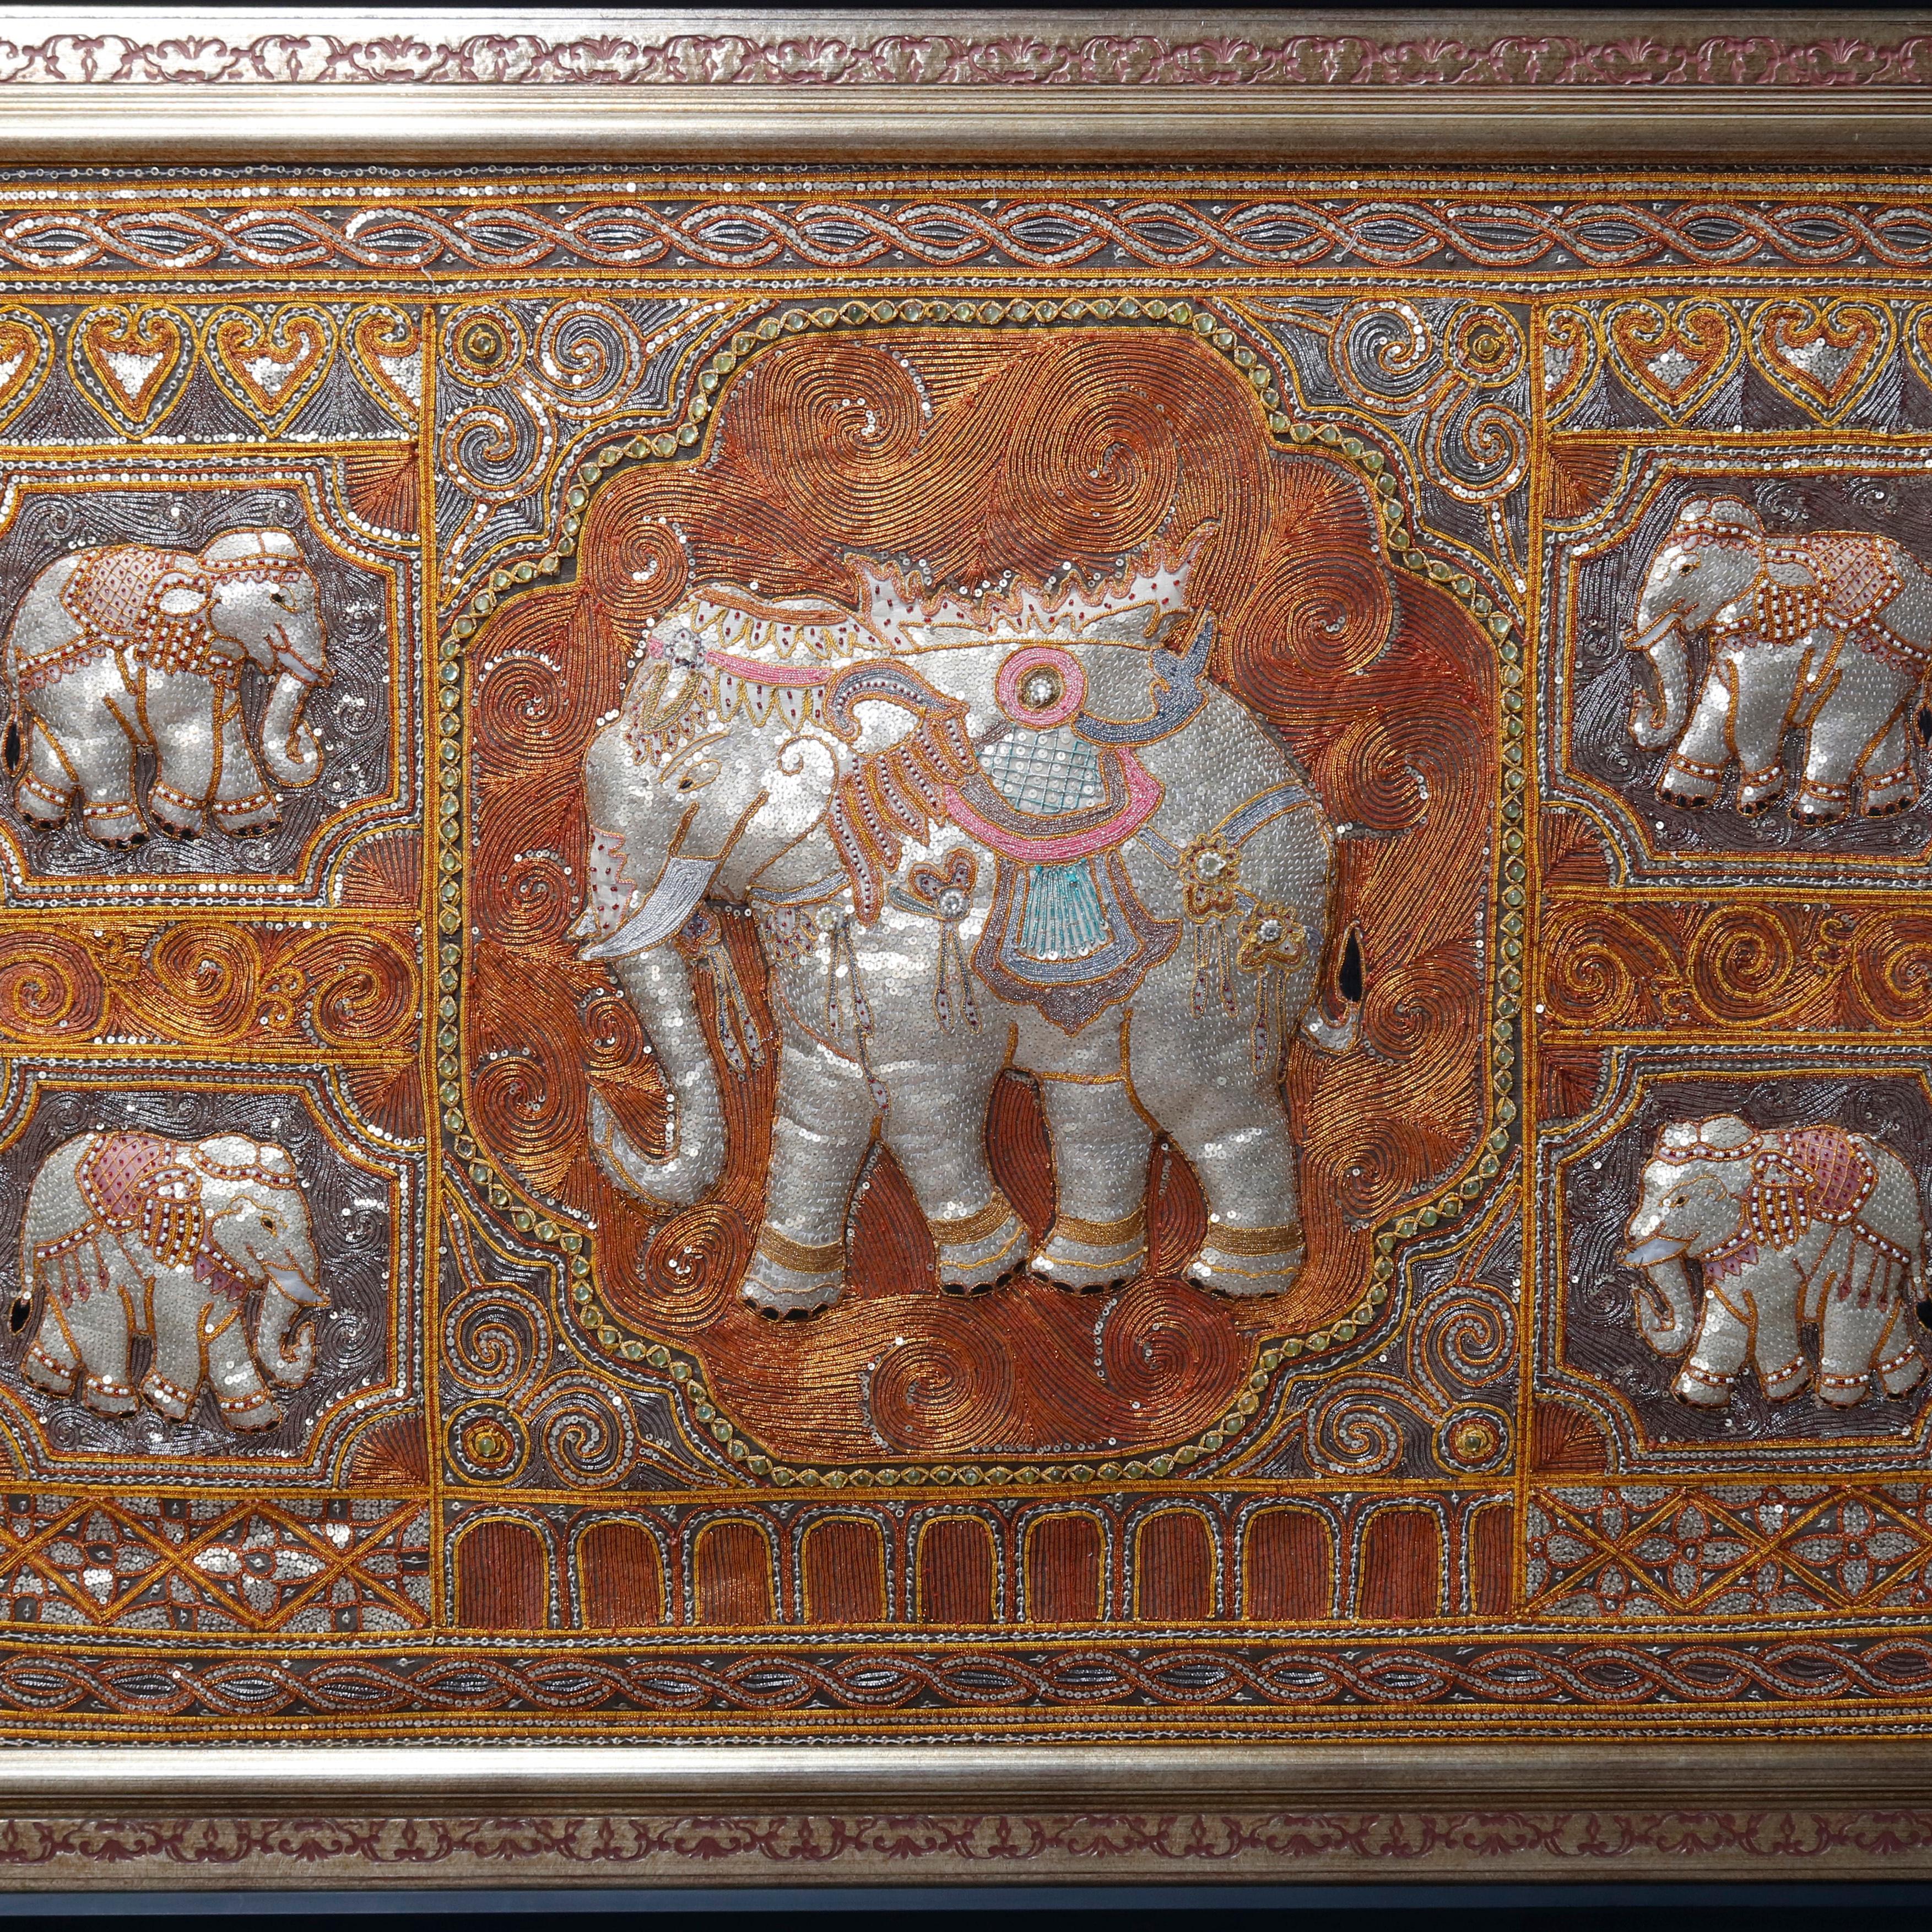 A framed figural Kalaga offers central reserve of an elephant surrounded by additional elephant reserves in a hand embroidered, padded & jeweled tapestry, often associated with Thailand, 20th century

***DELIVERY NOTICE – Due to COVID-19 we are